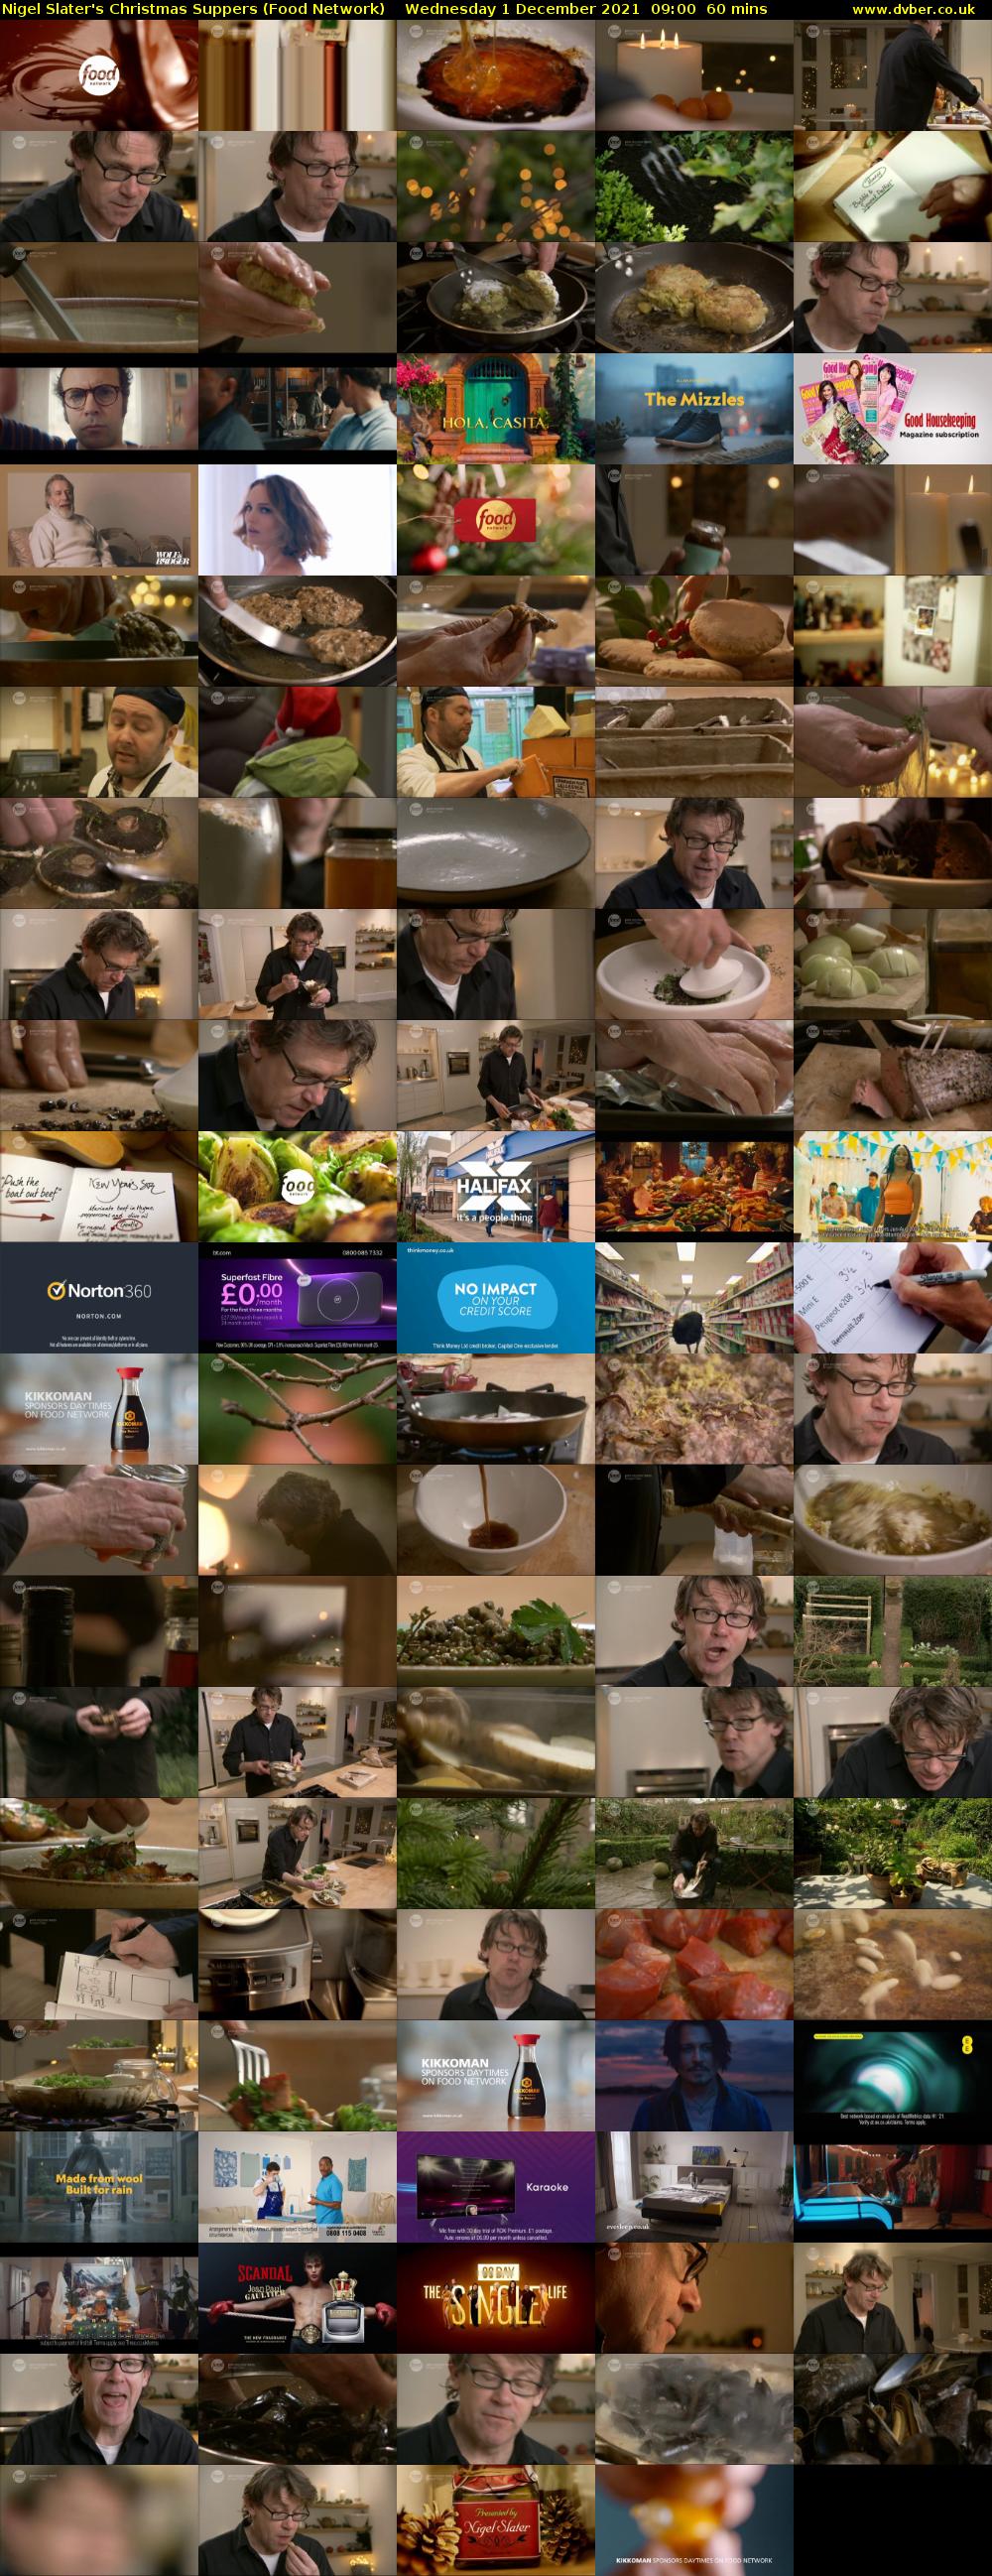 Nigel Slater's Christmas Suppers (Food Network) Wednesday 1 December 2021 09:00 - 10:00